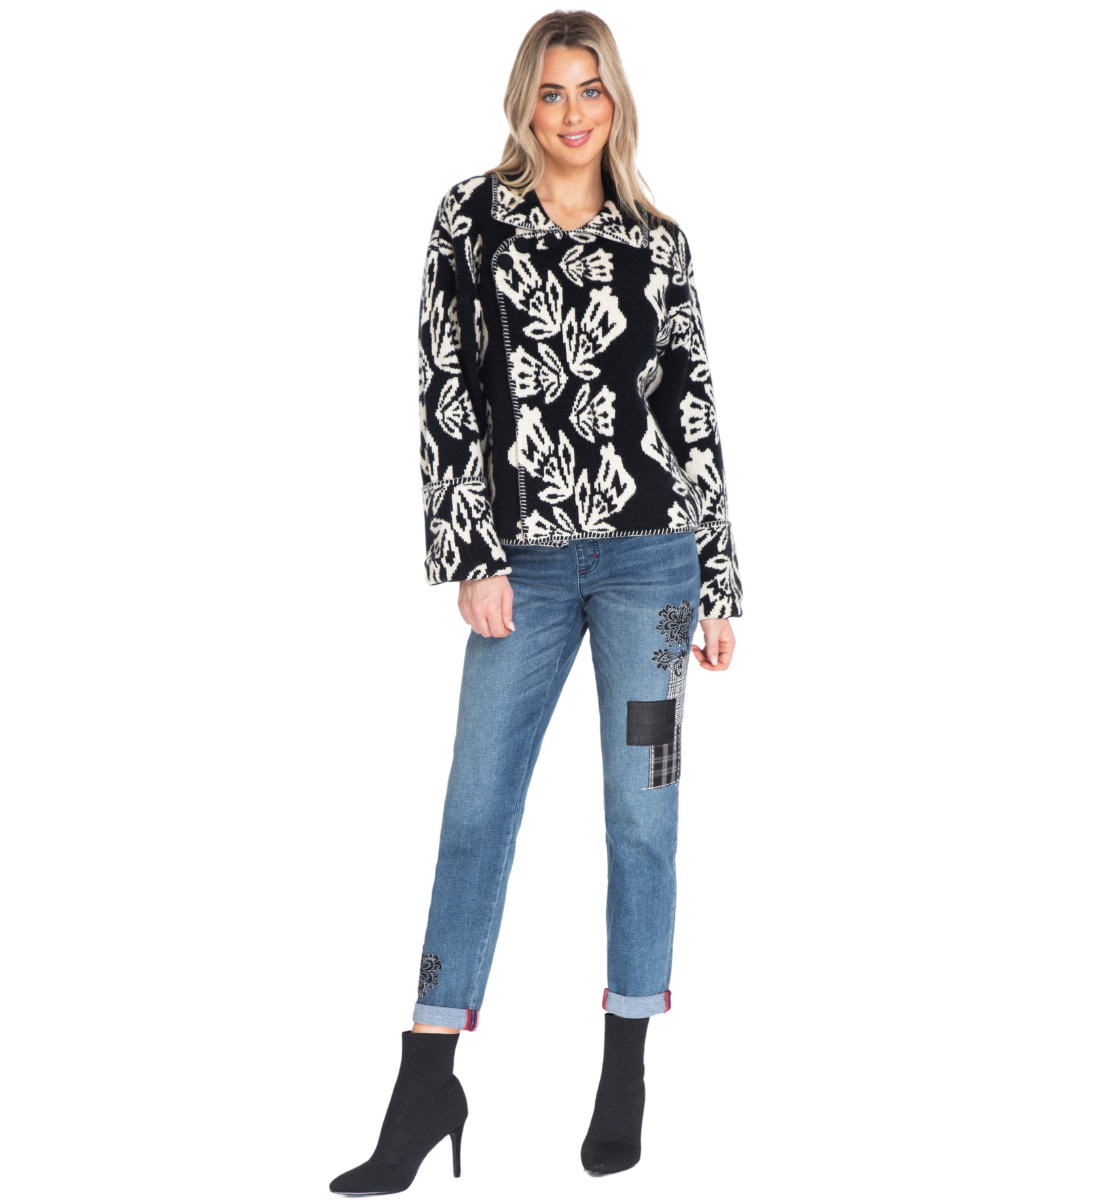 Tru Luxe Jeans  The ultimate crossover jean with a modern missy